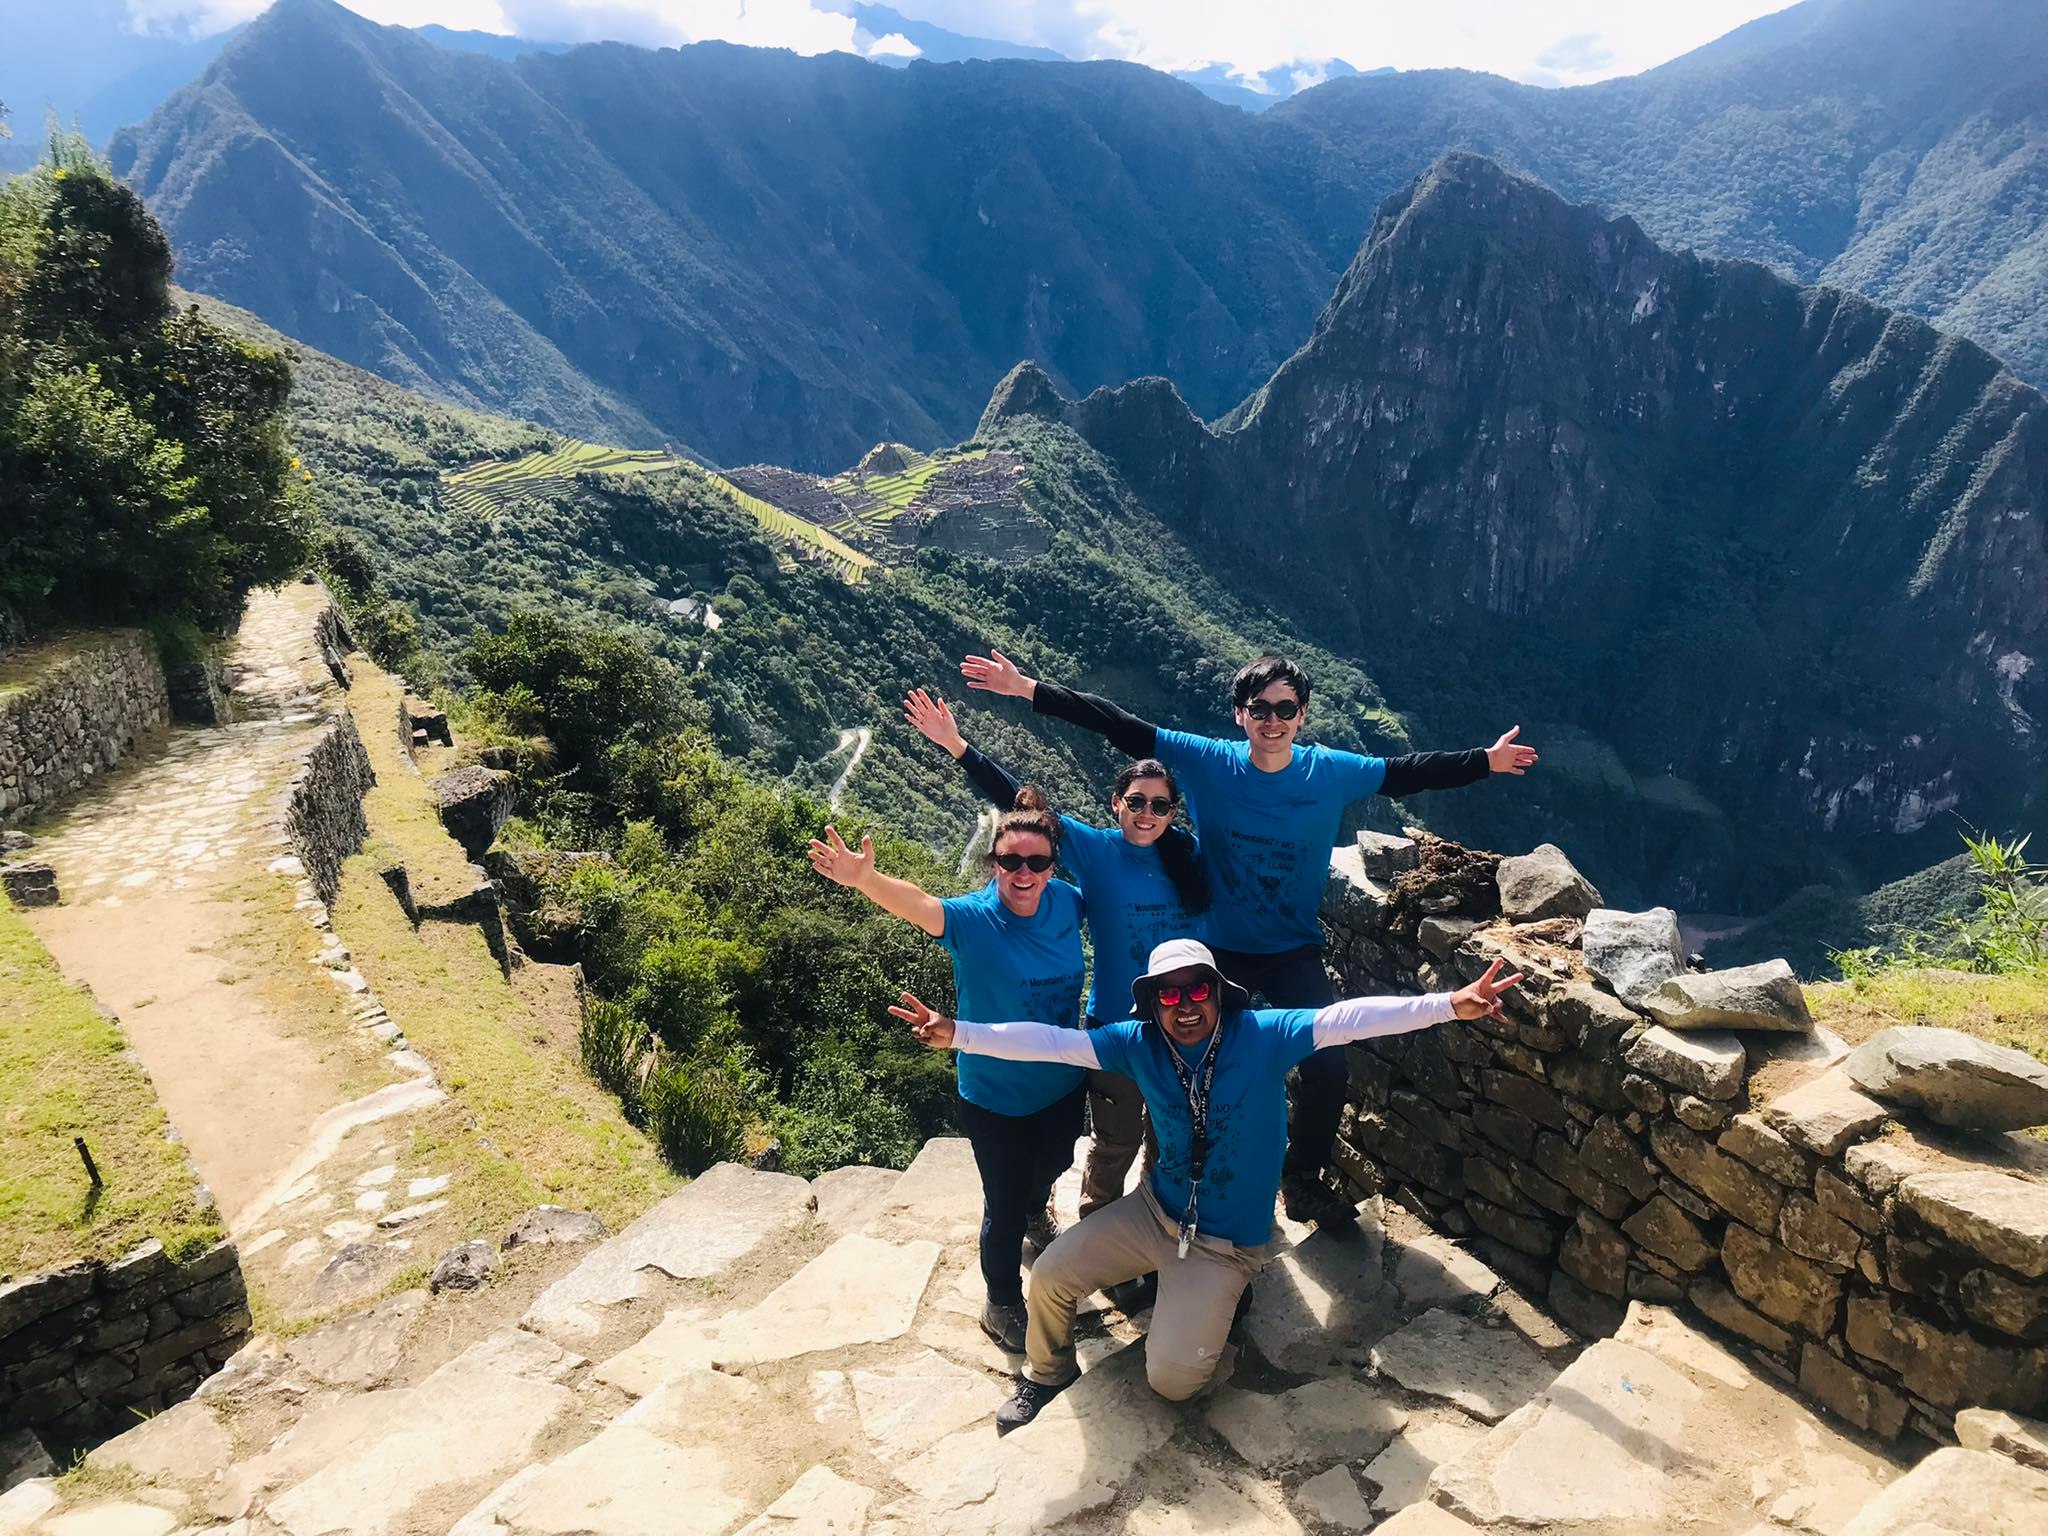 Just arrived to the Sungate on day 1 - - Short Inca trail to Machu Picchu